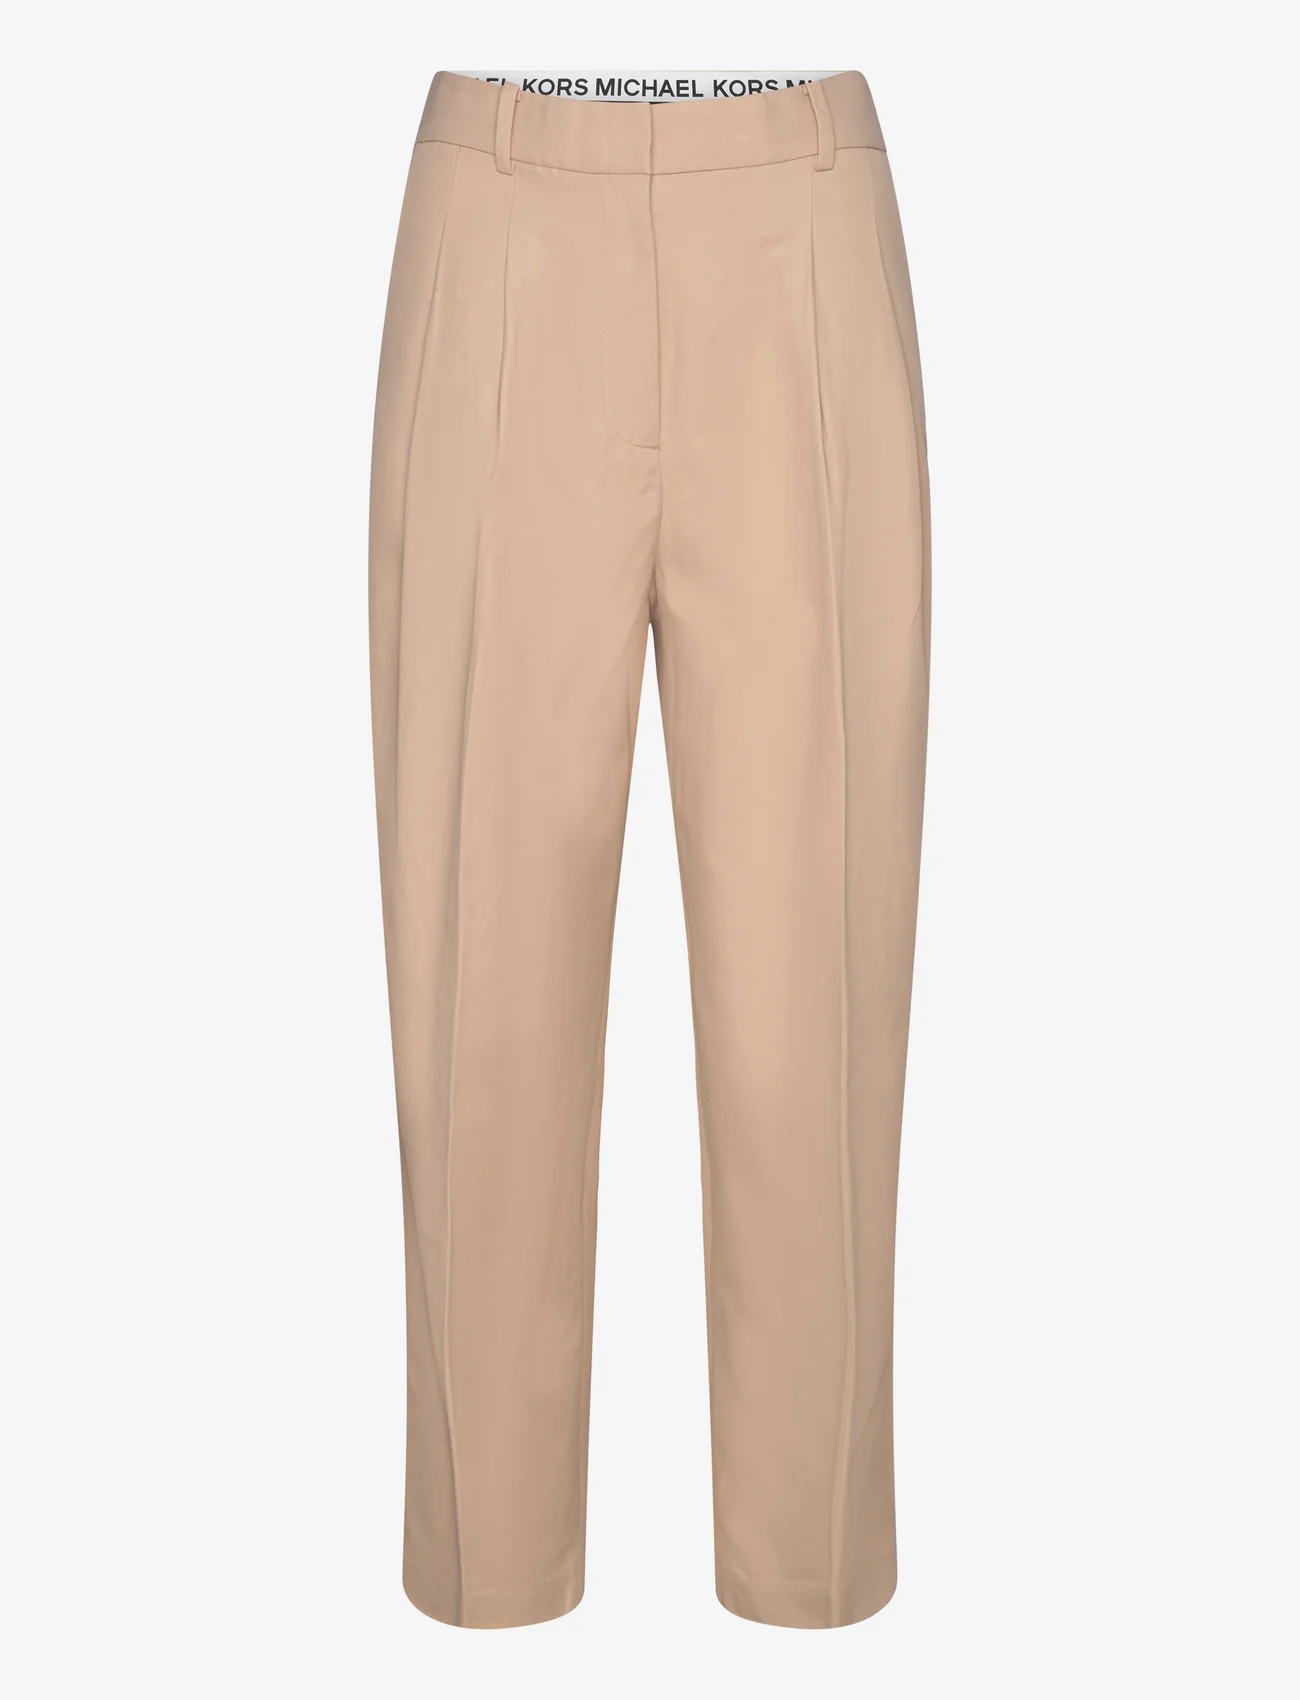 Michael Kors - PLEATED ANKLE PANT - chino's - buff - 0